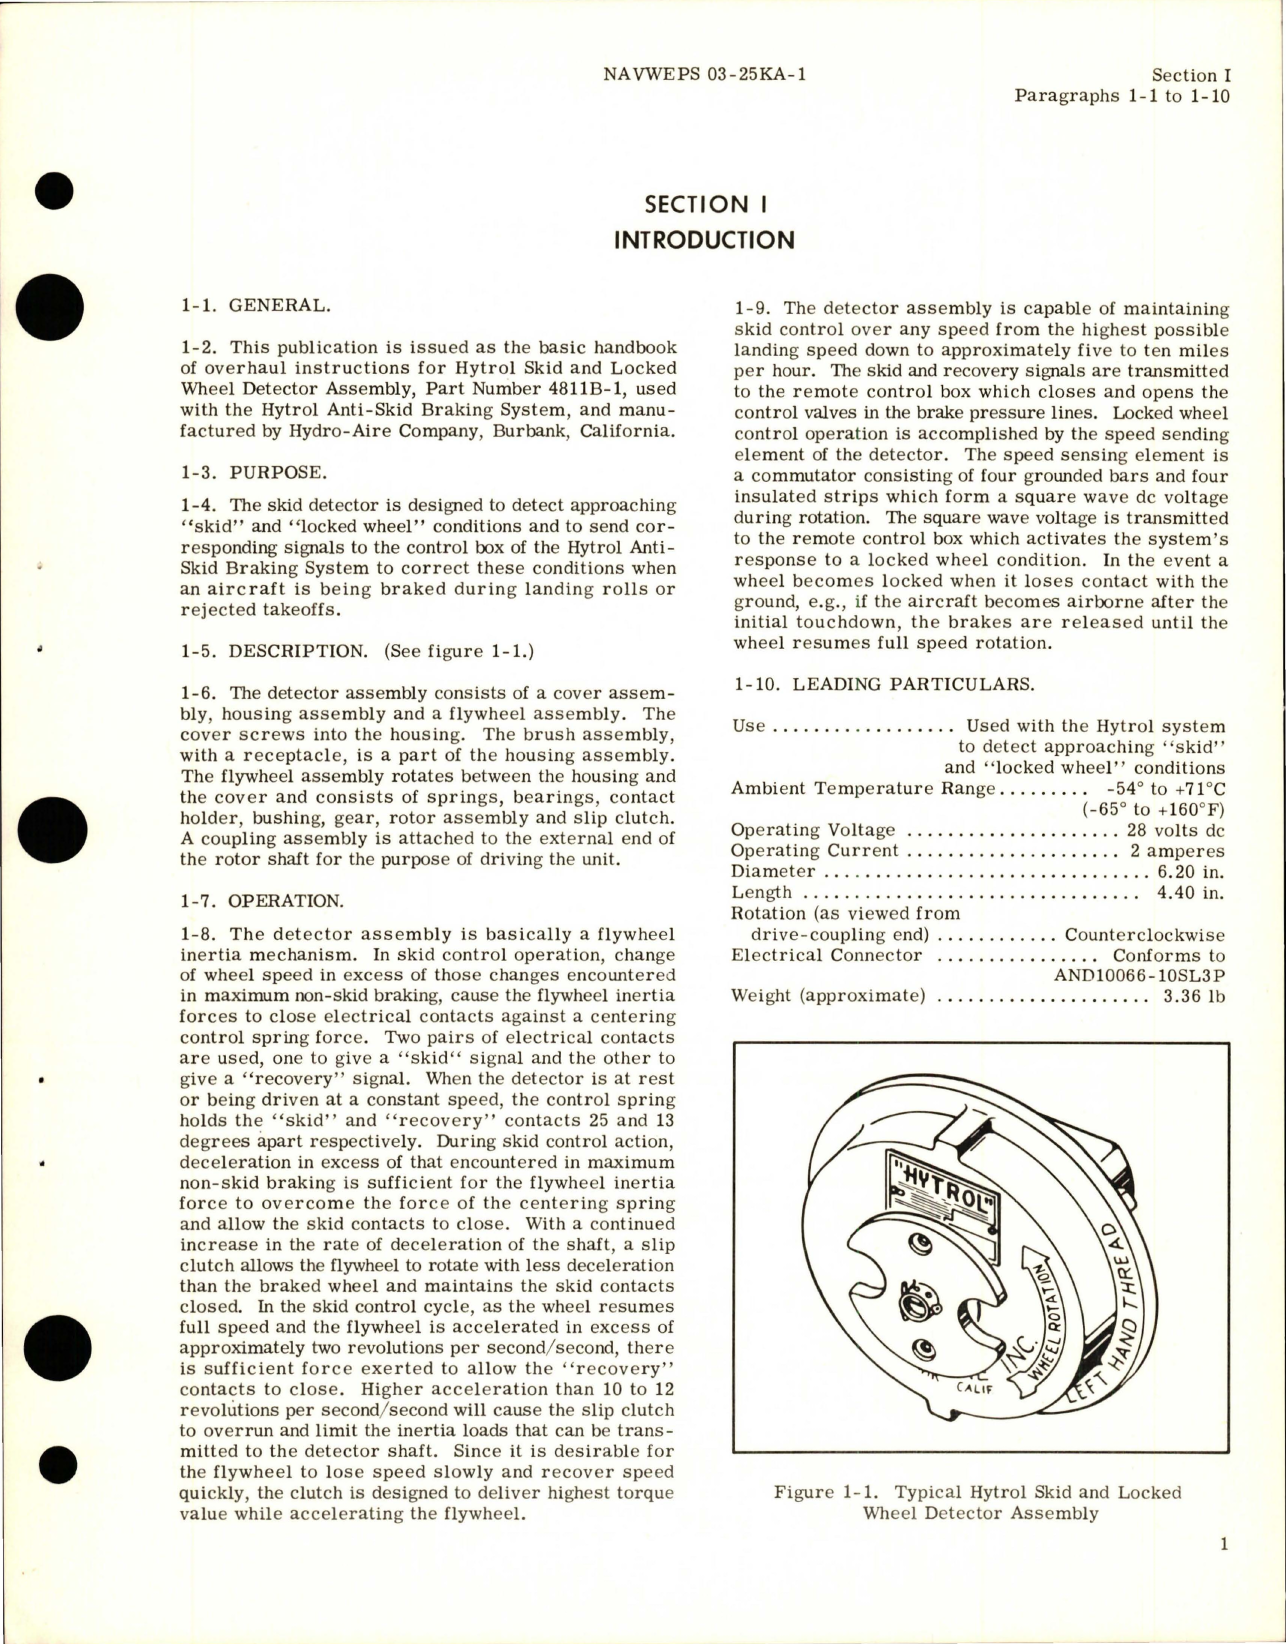 Sample page 5 from AirCorps Library document: Overhaul Instructions for Hytrol Skid and Locked Wheel Detector Assembly - Parts 4811B-1 and 4811B-2 